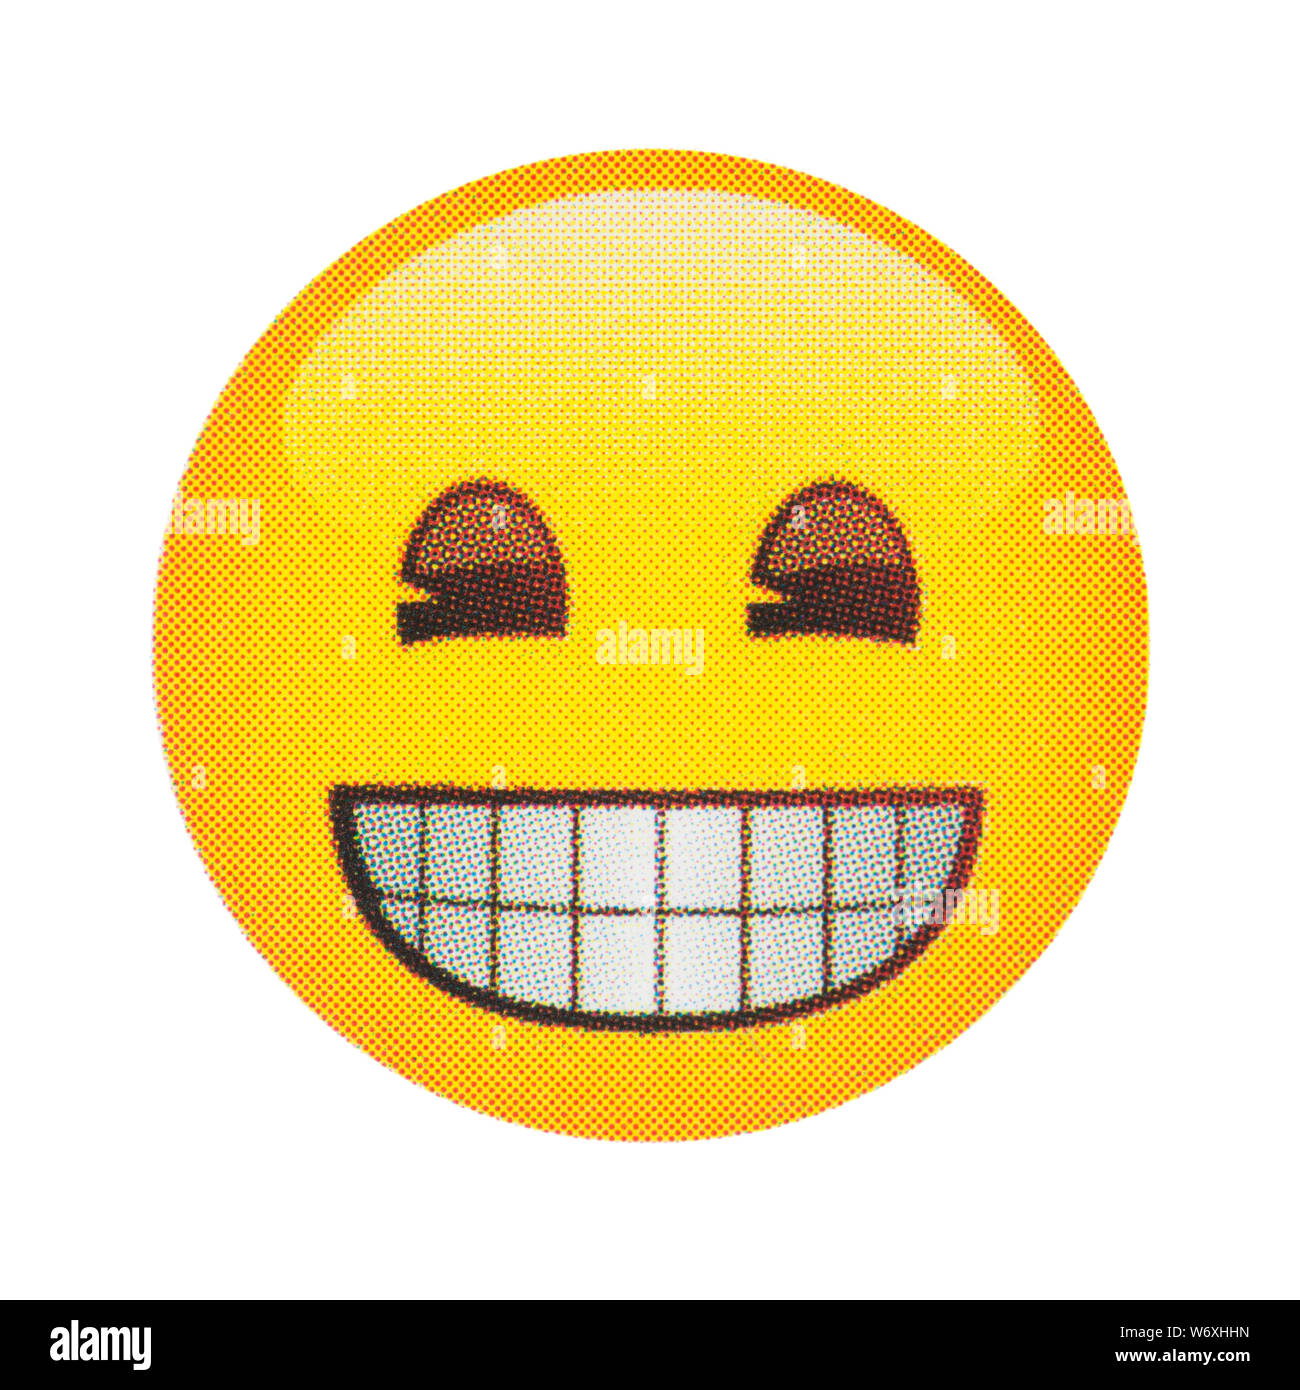 Grinning face emoticon Stock Photo